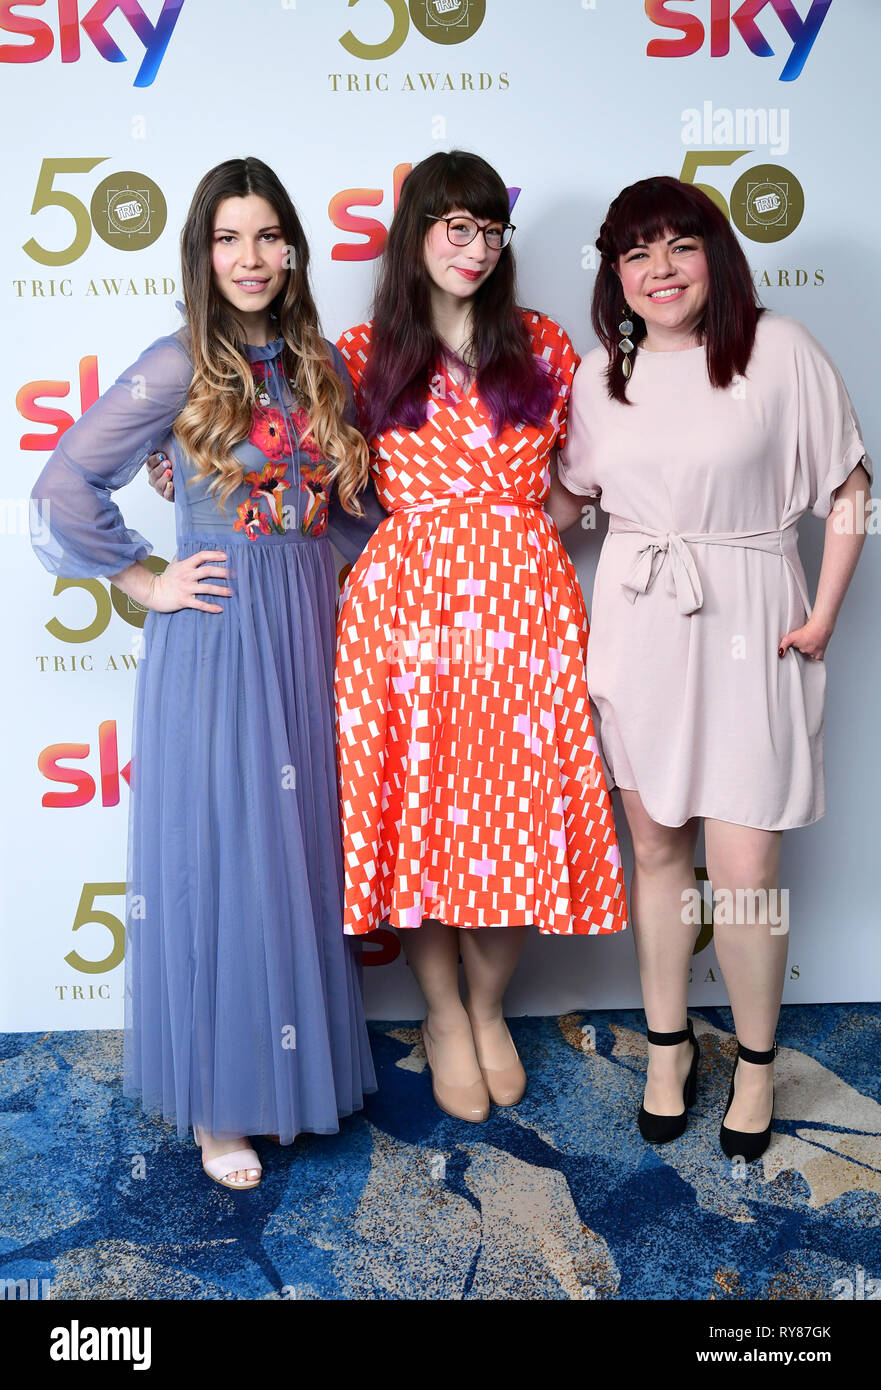 Manon, Kim-Joy and Briony attending the TRIC Awards 2019 50th